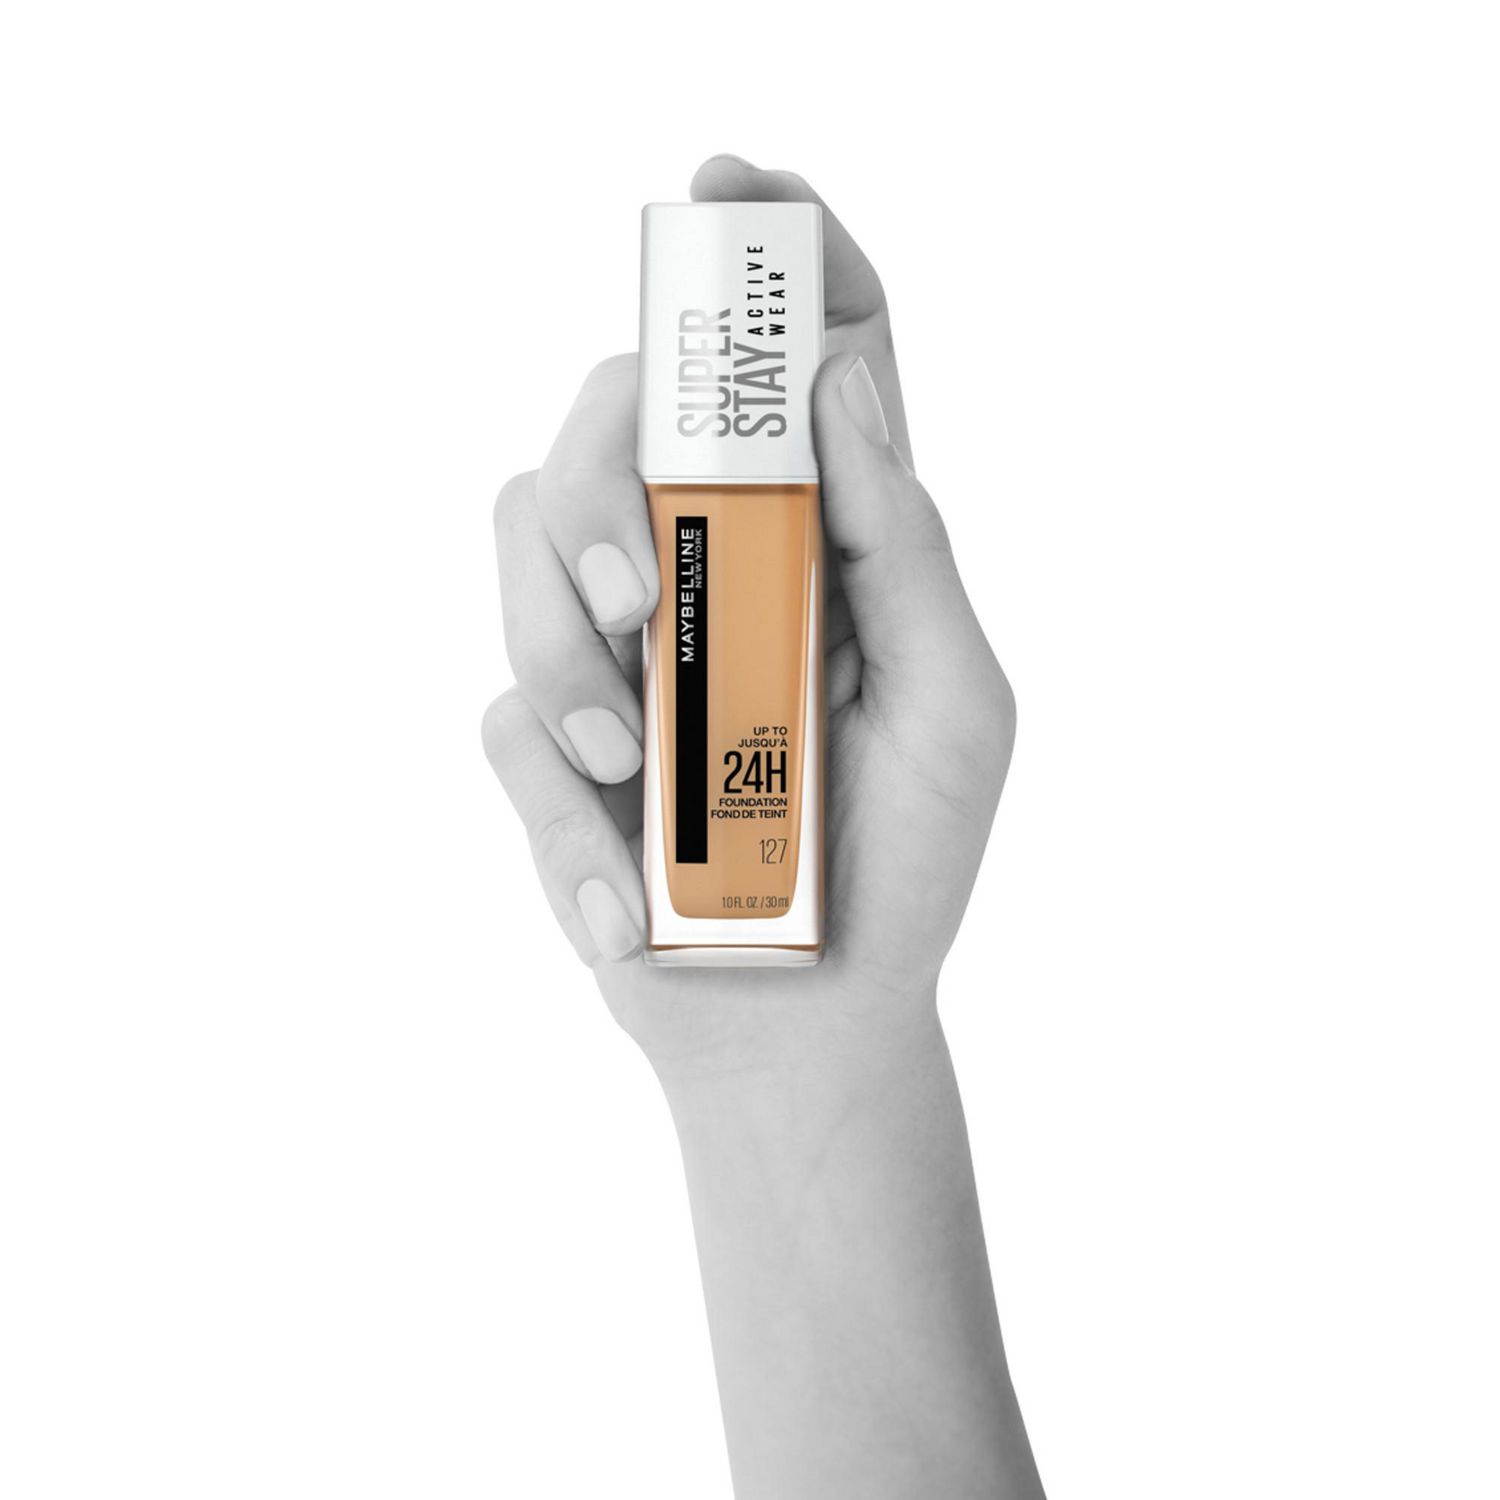 Maybelline New York Maybelline Super Stay Full coverage liquid Foundation  Makeup, 127 Sand Beige, 30 Milliliters (Packaging may vary)